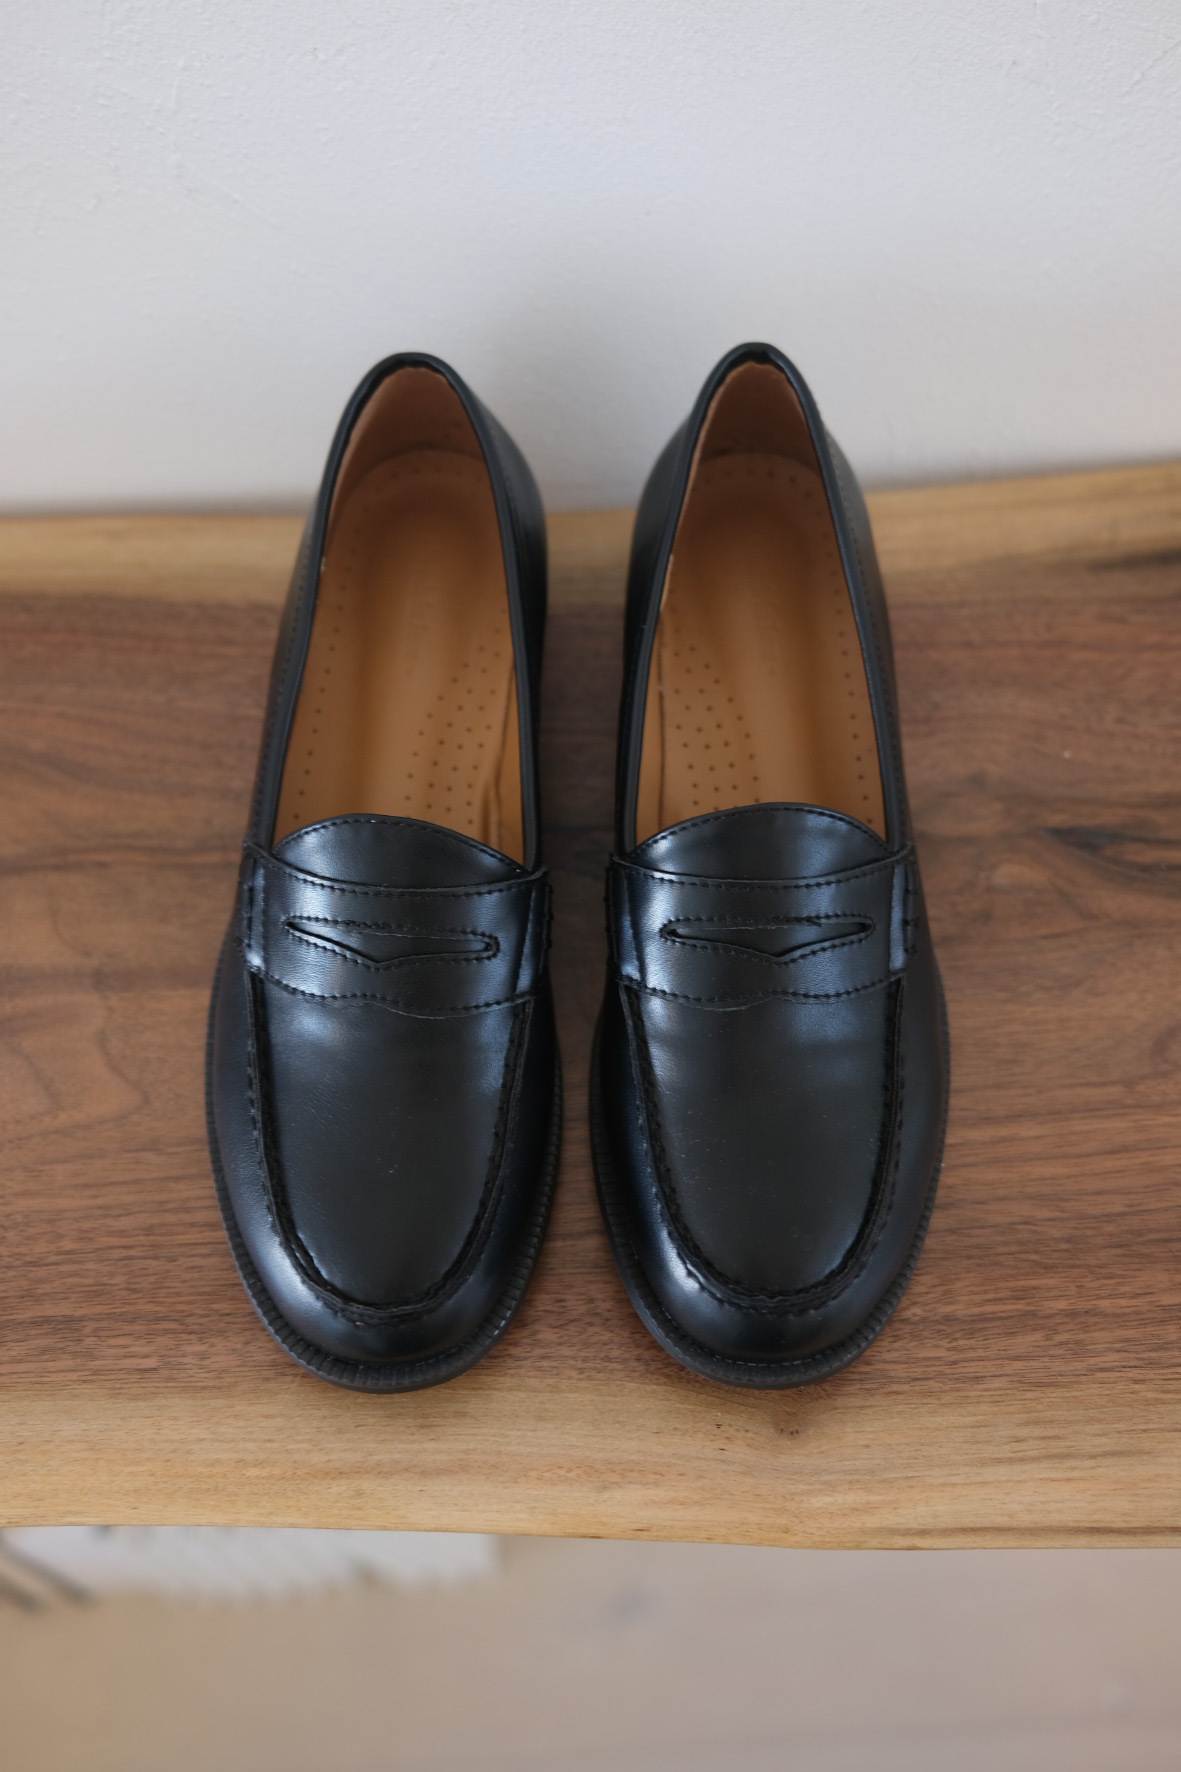 Classic leather penny loafer